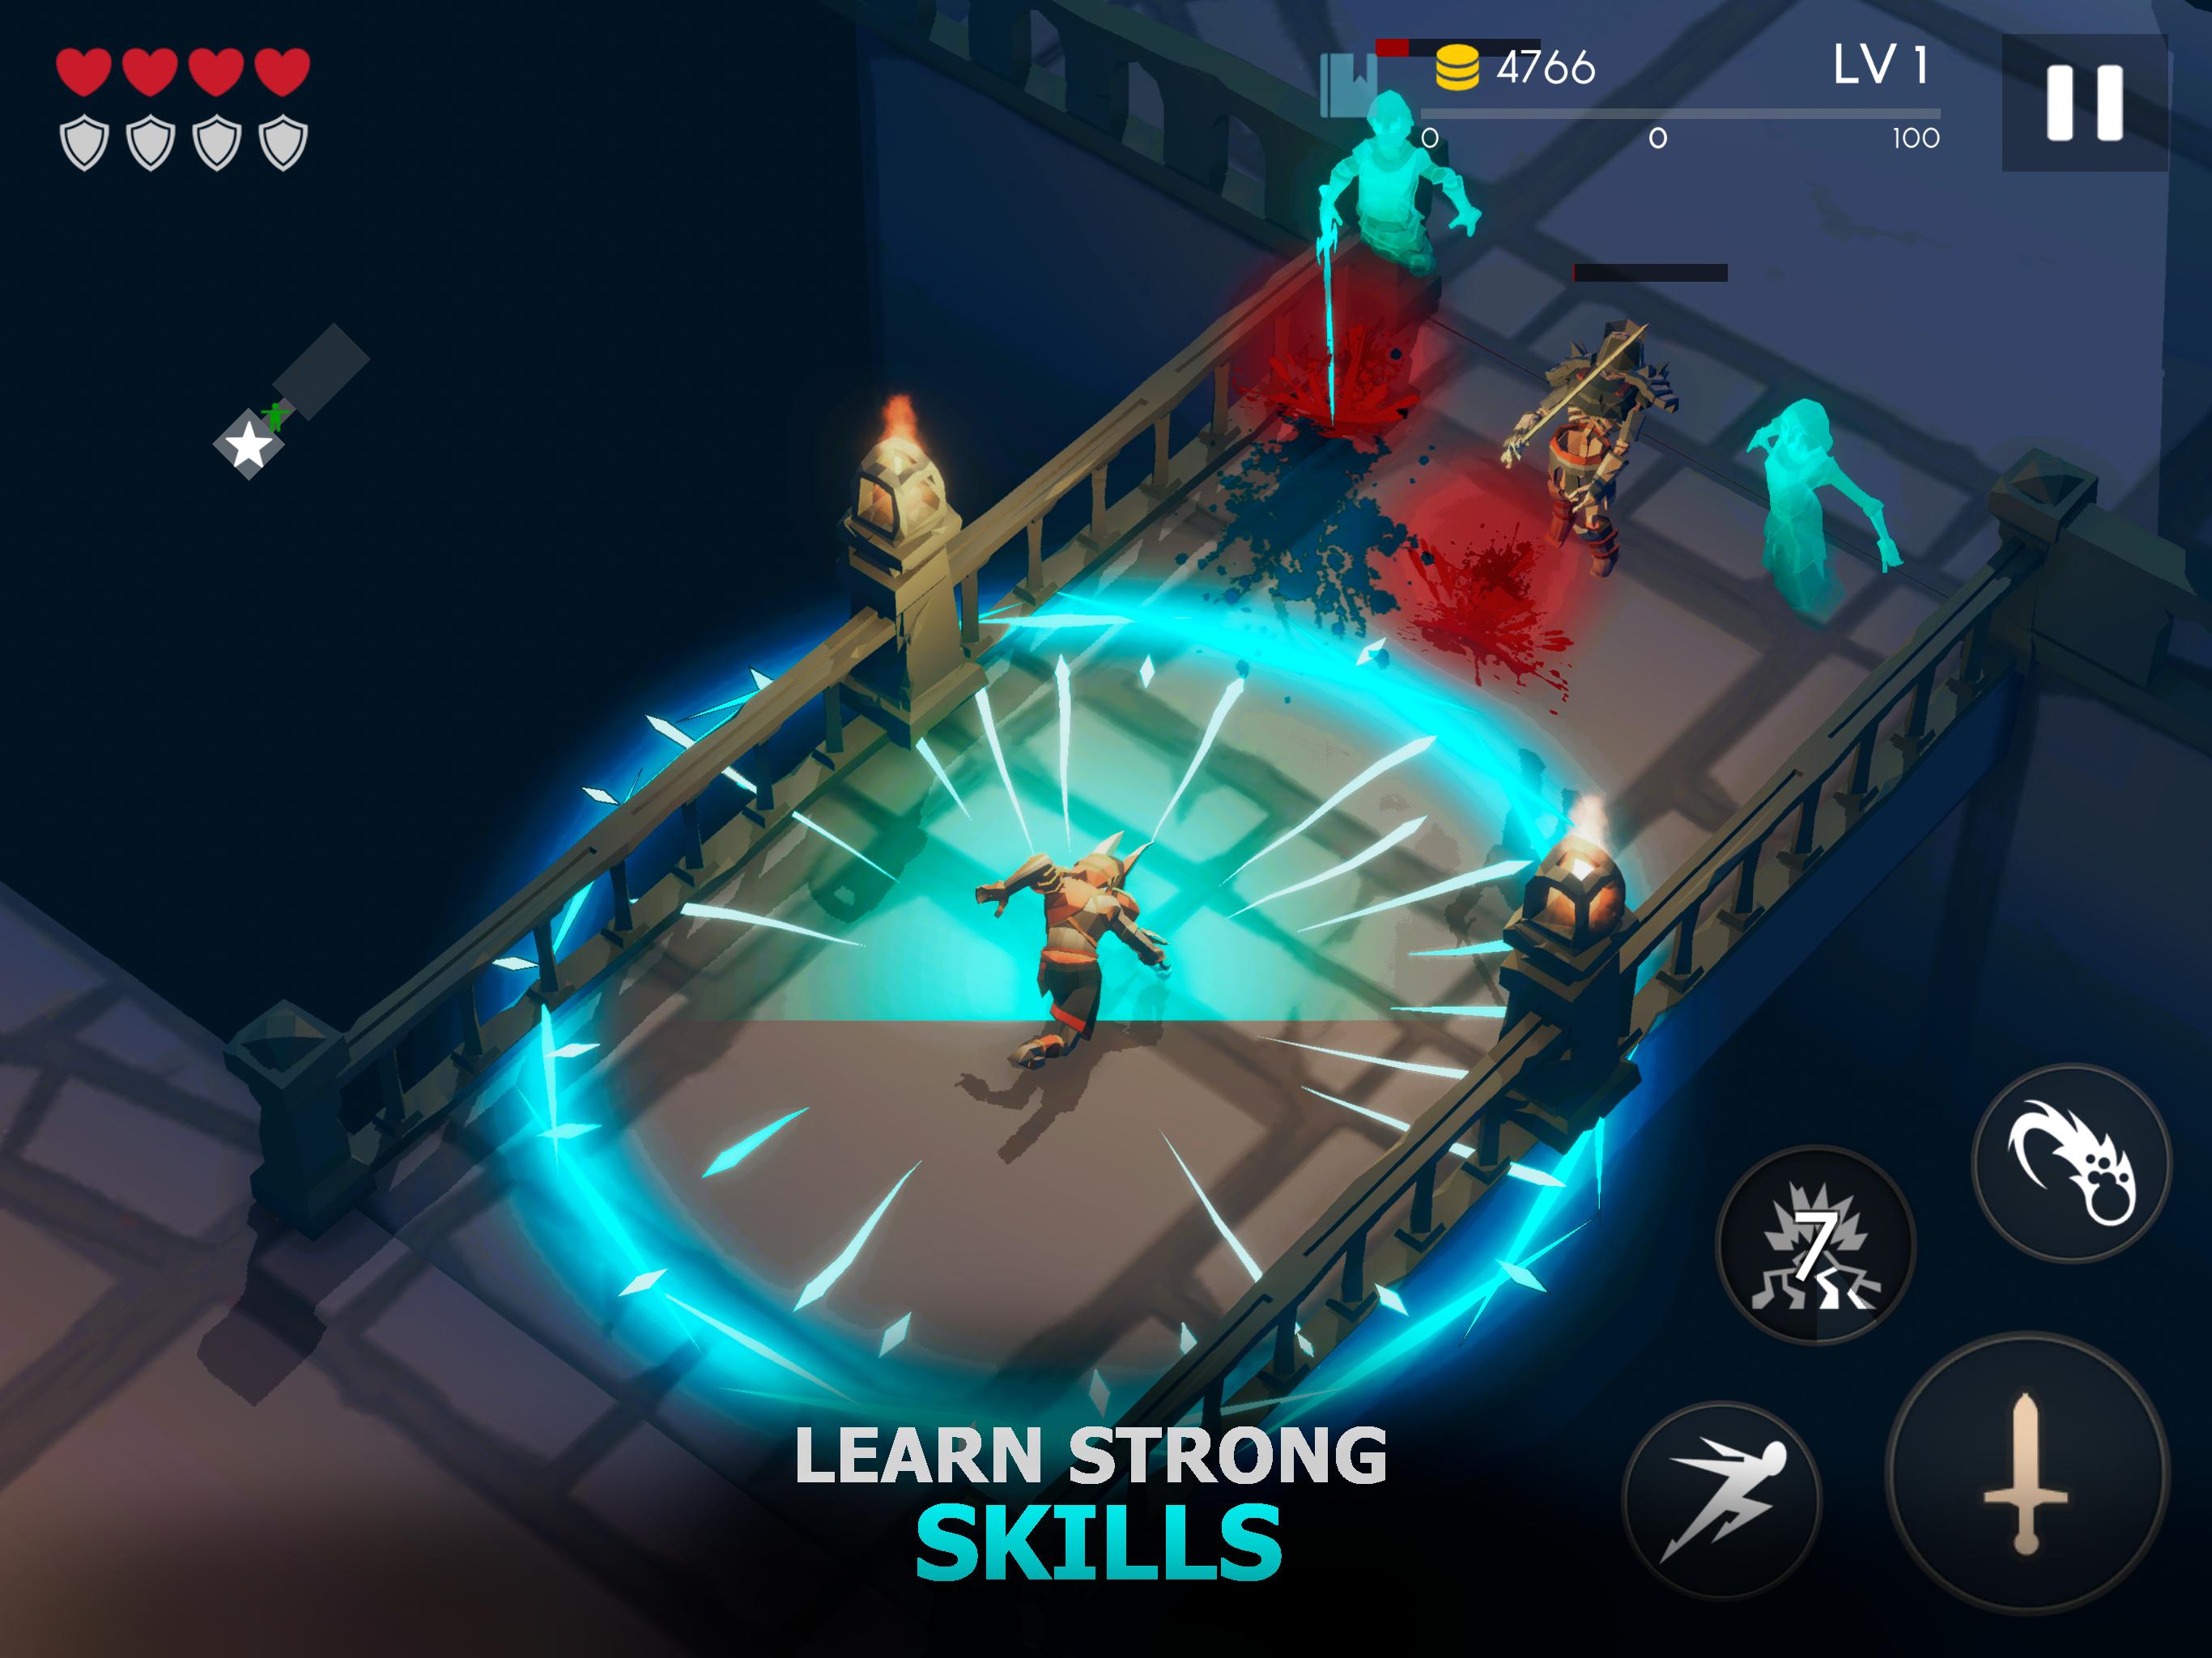 Additionally, Real-Time Combat Action Role-Playing is a component of Restless Dungeon's gameplay